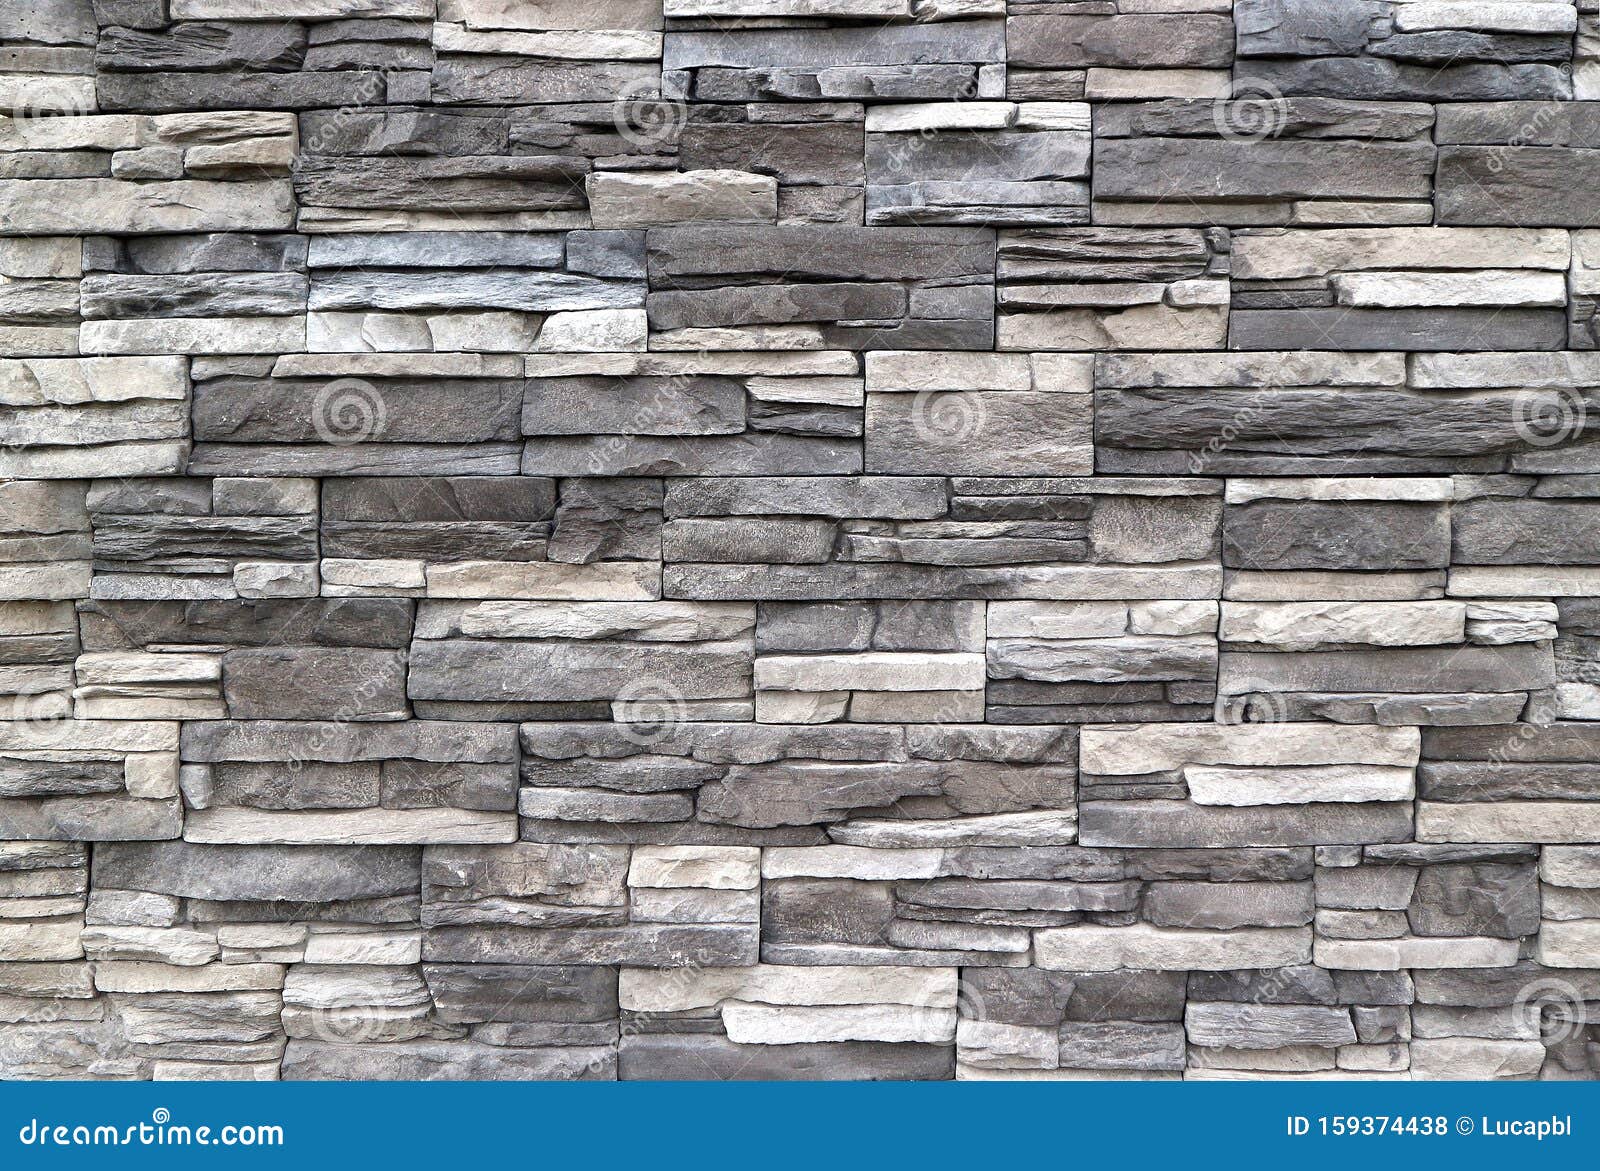 stone cladding wall made of  striped stacked slabs of natural rocks. colors are dark gray and white